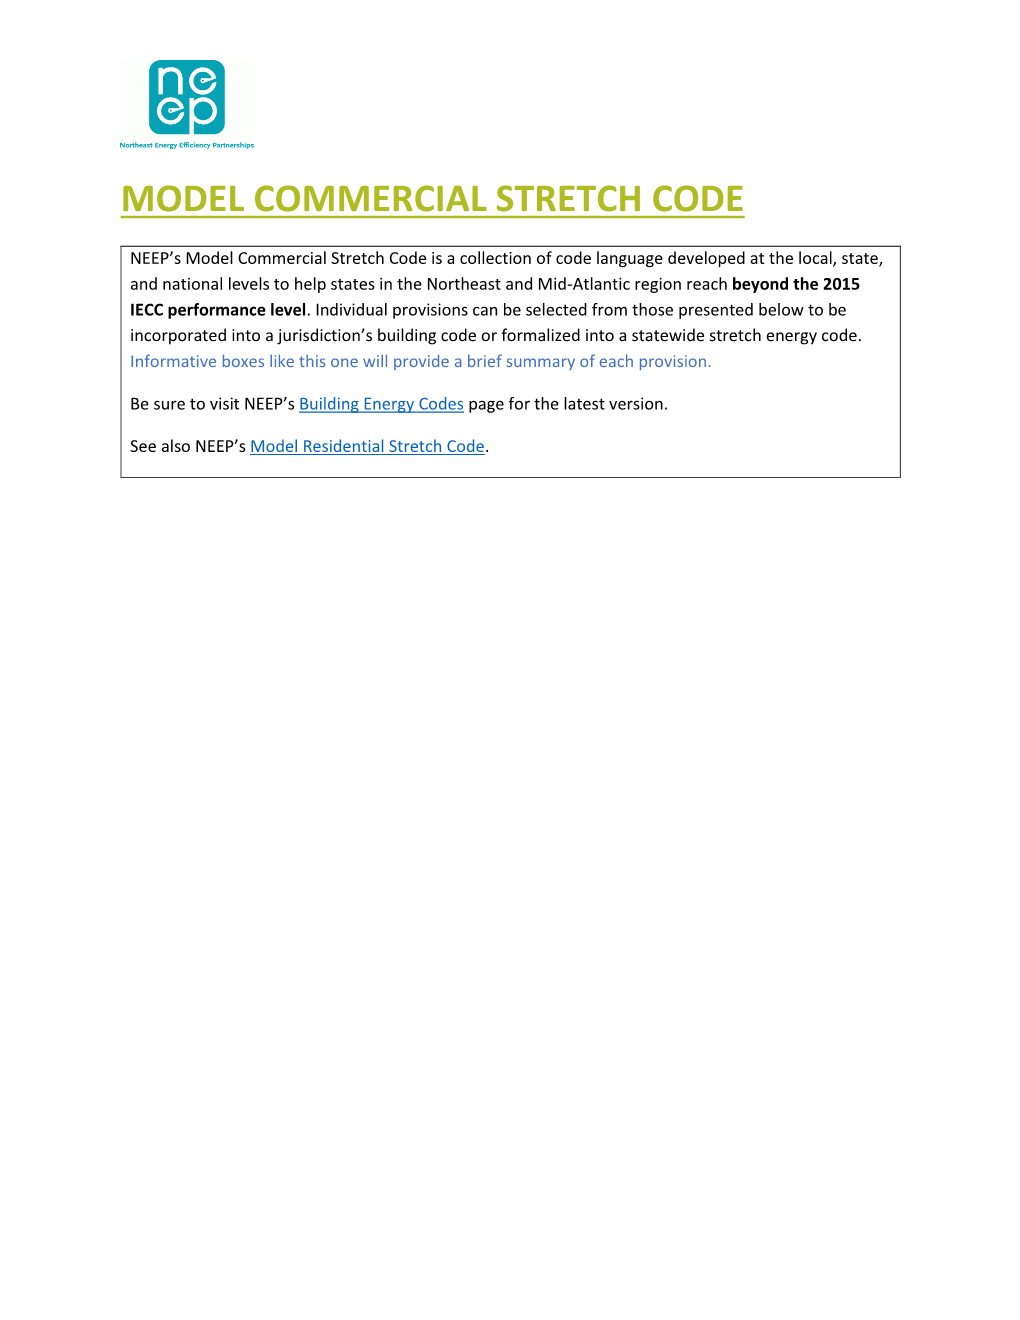 Model Commercial Stretch Code